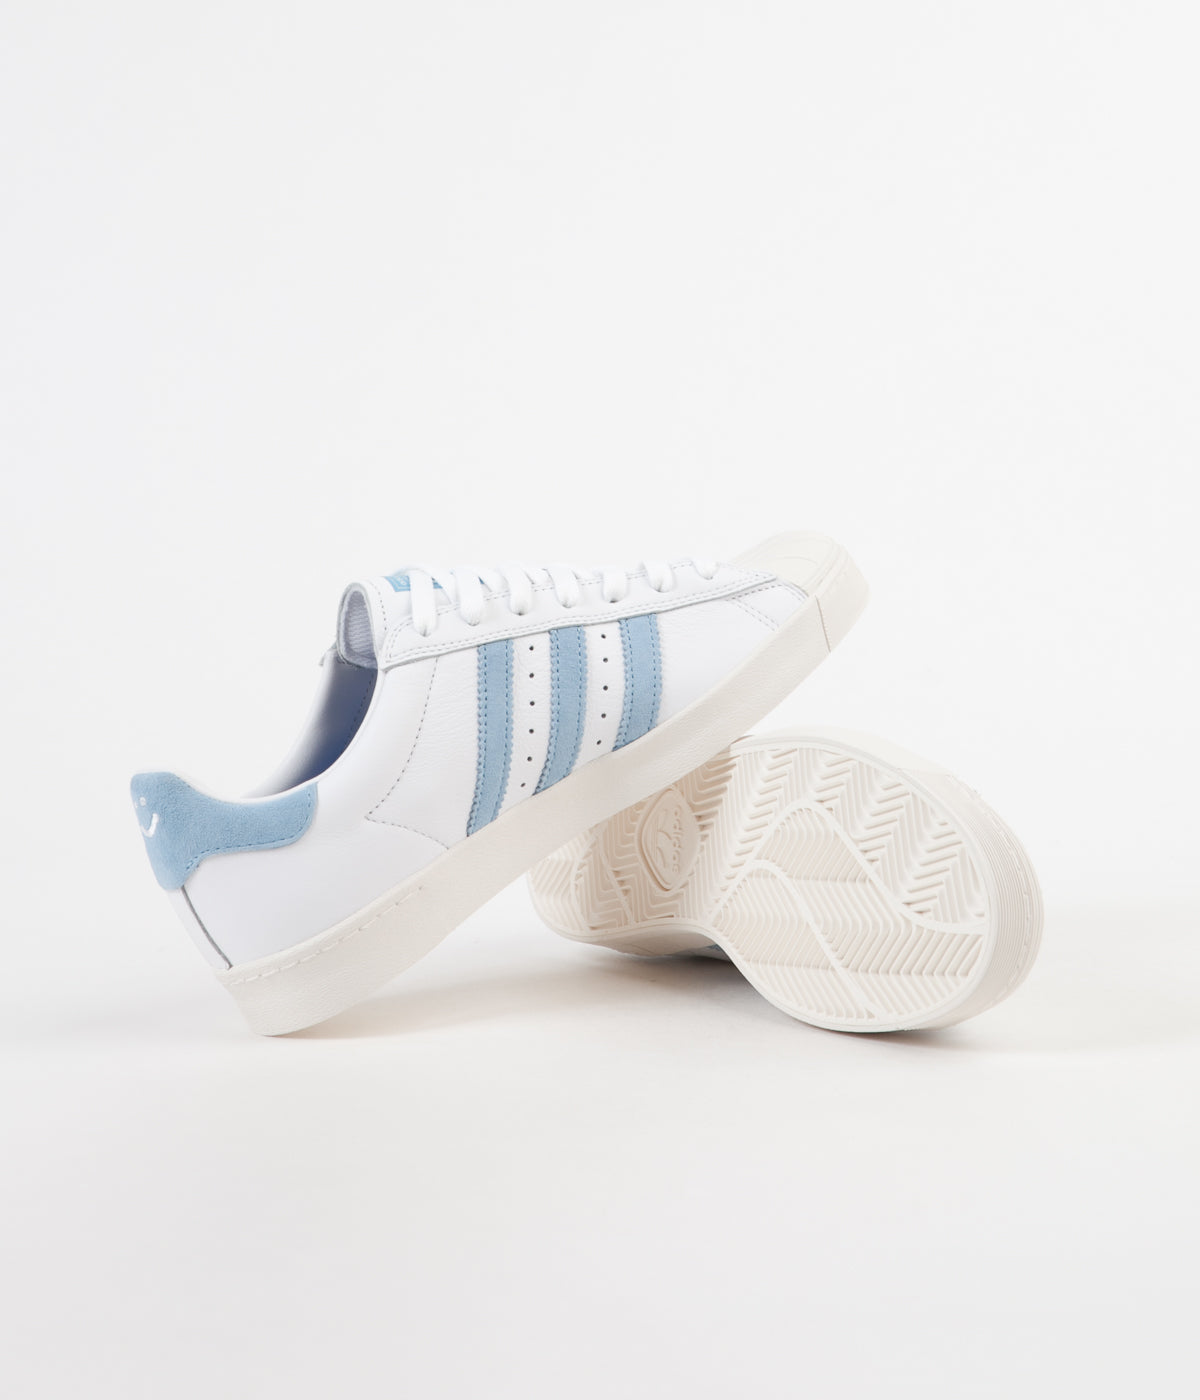 adidas x krooked superstar vulc shoes